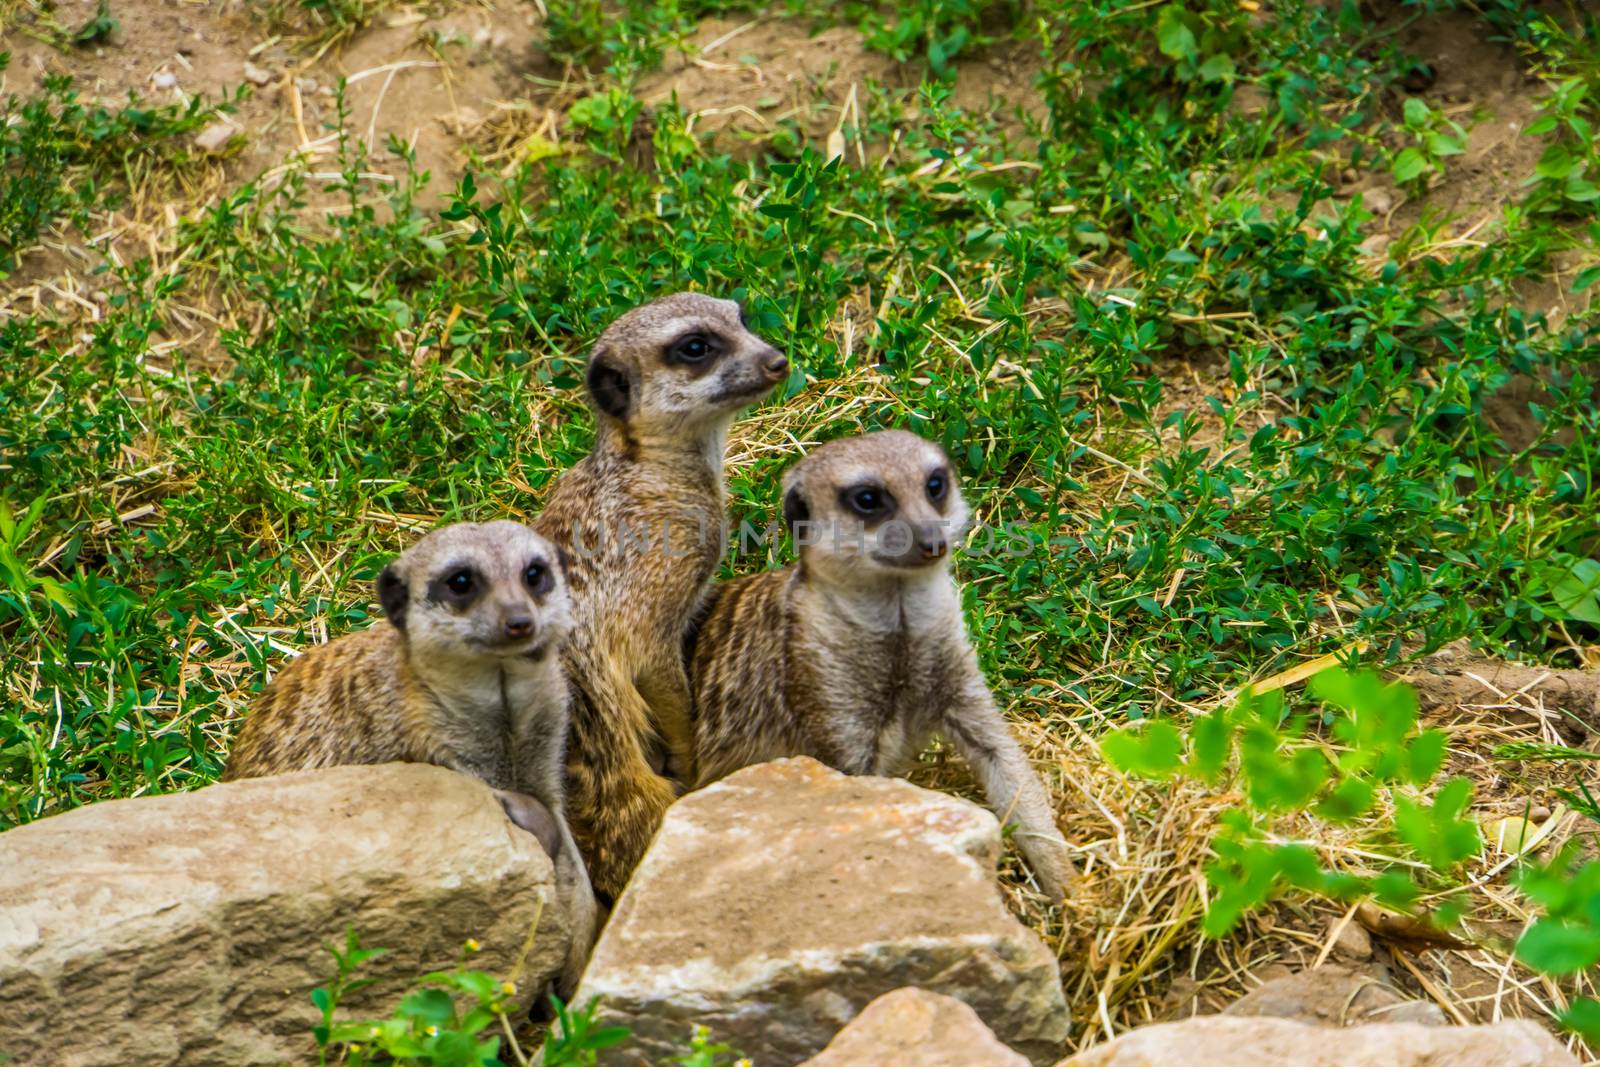 cute group of meerkats sitting together, tropical animal specie from Africa